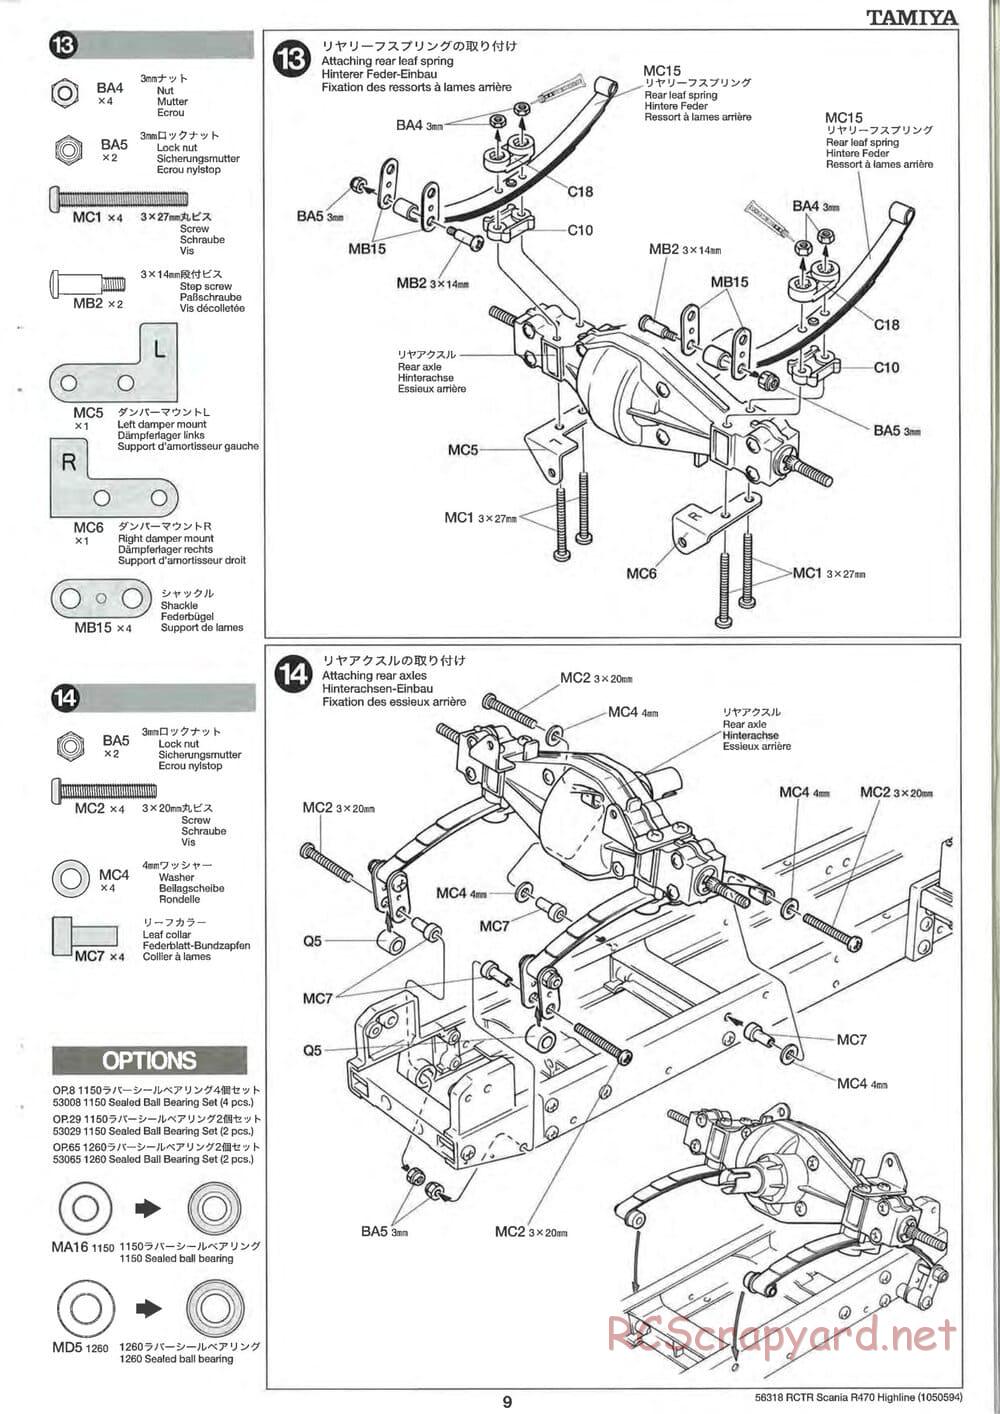 Tamiya - Scania R470 Highline Tractor Truck Chassis - Manual - Page 9